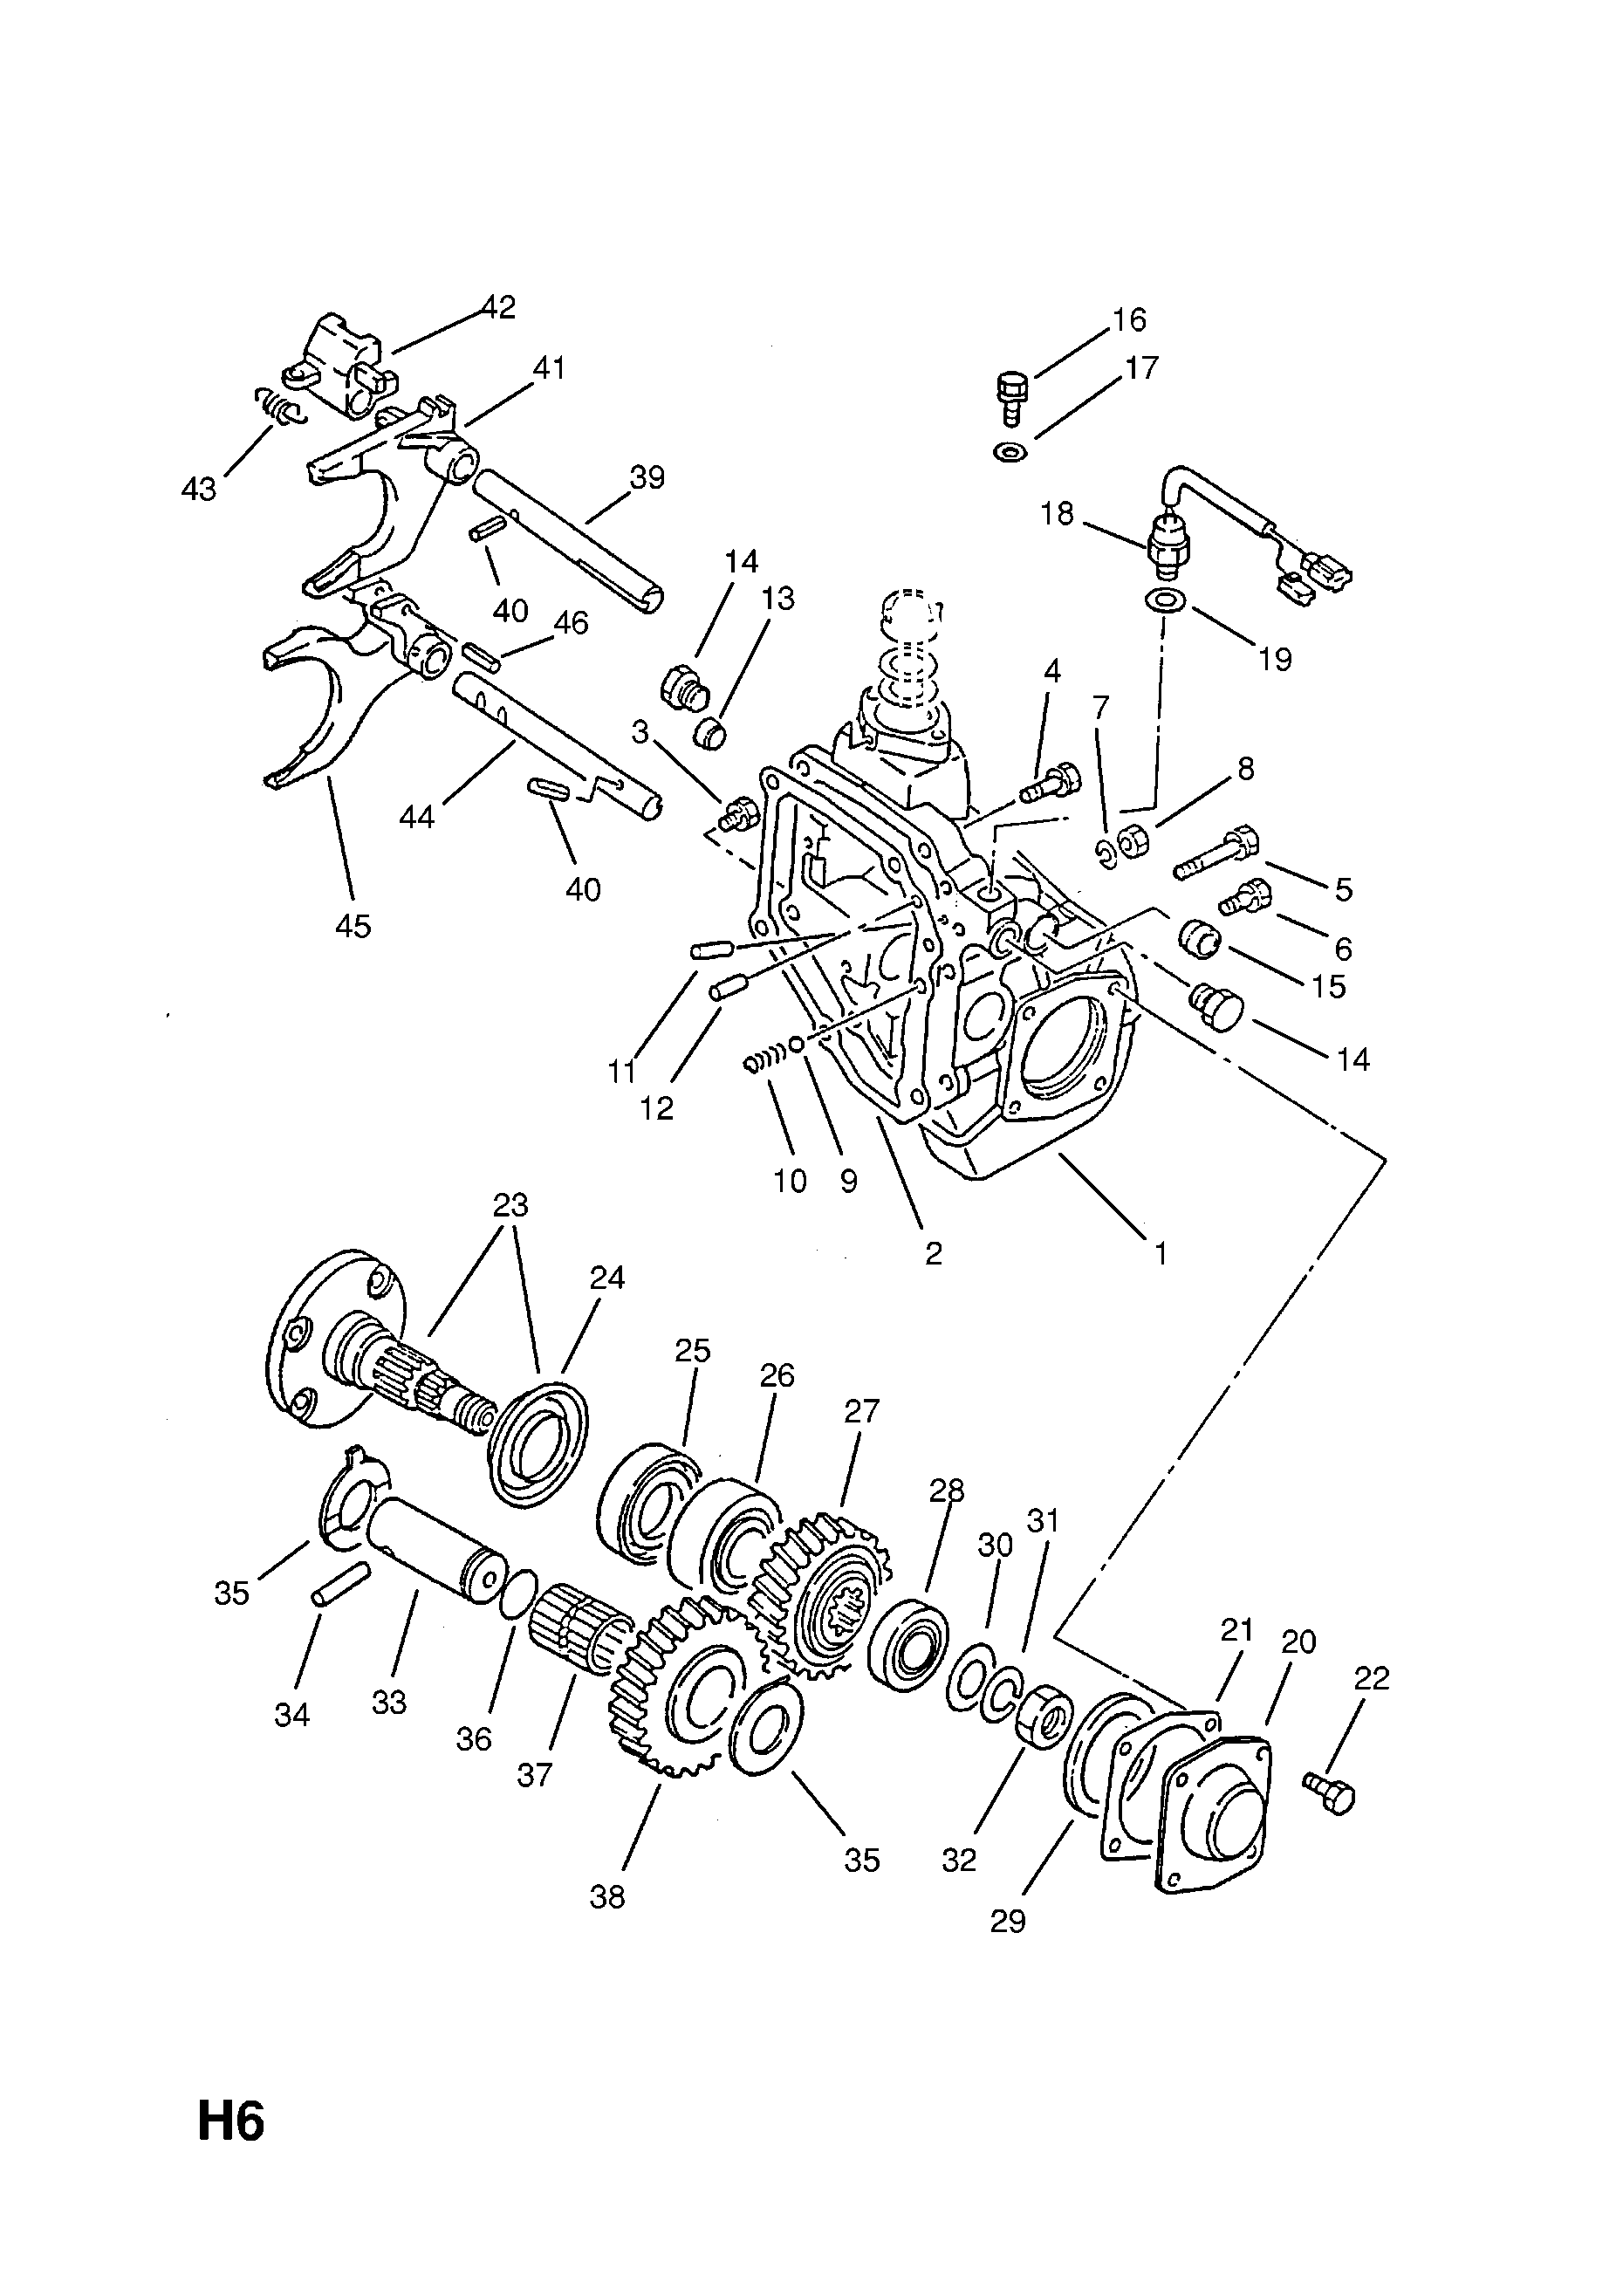 TRANSFER MAIN DRIVE AND COUPLING